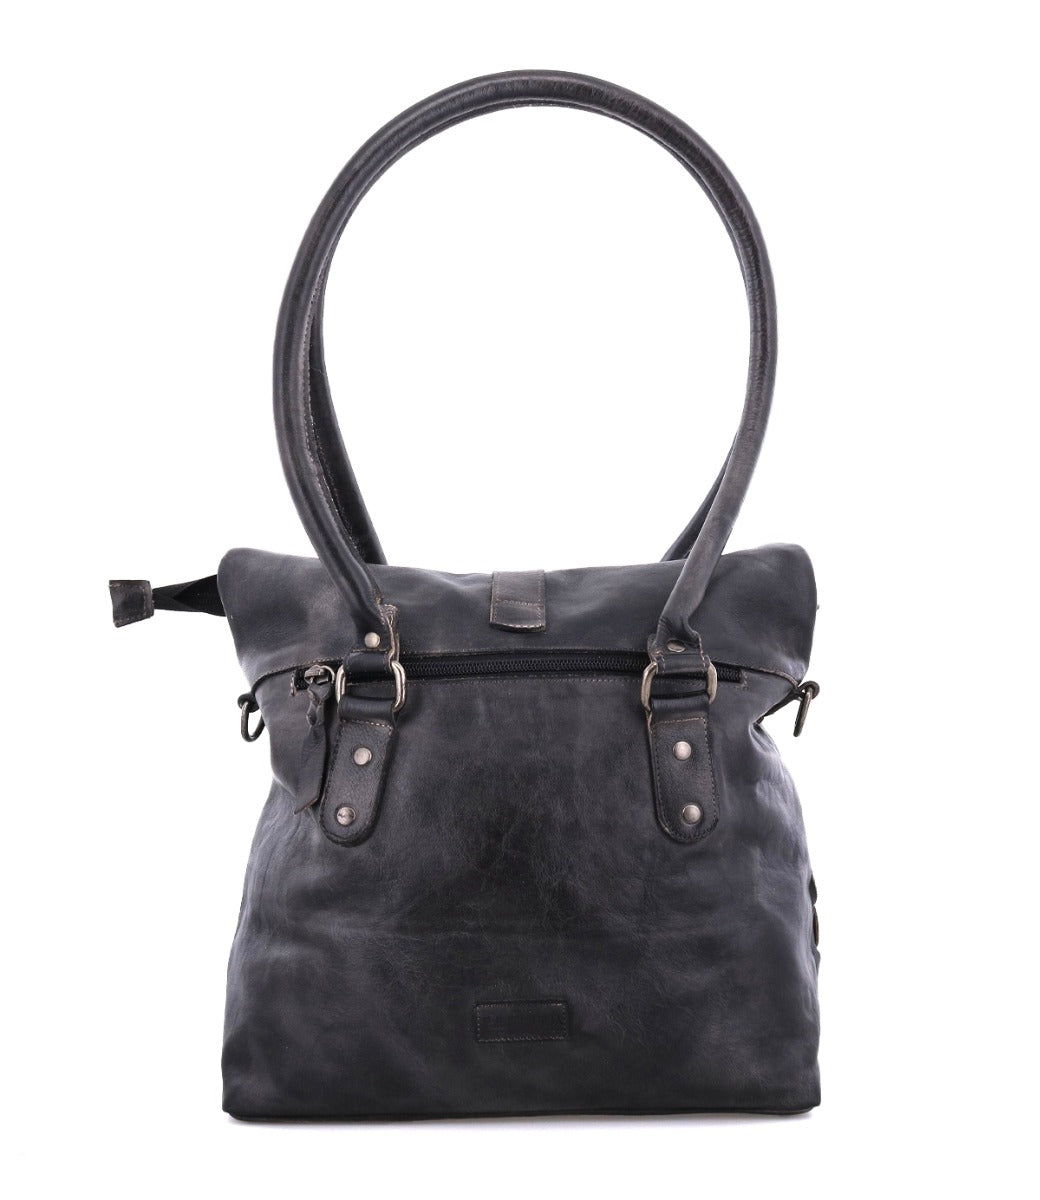 A black leather Rachel handbag with two handles by Bed Stu.